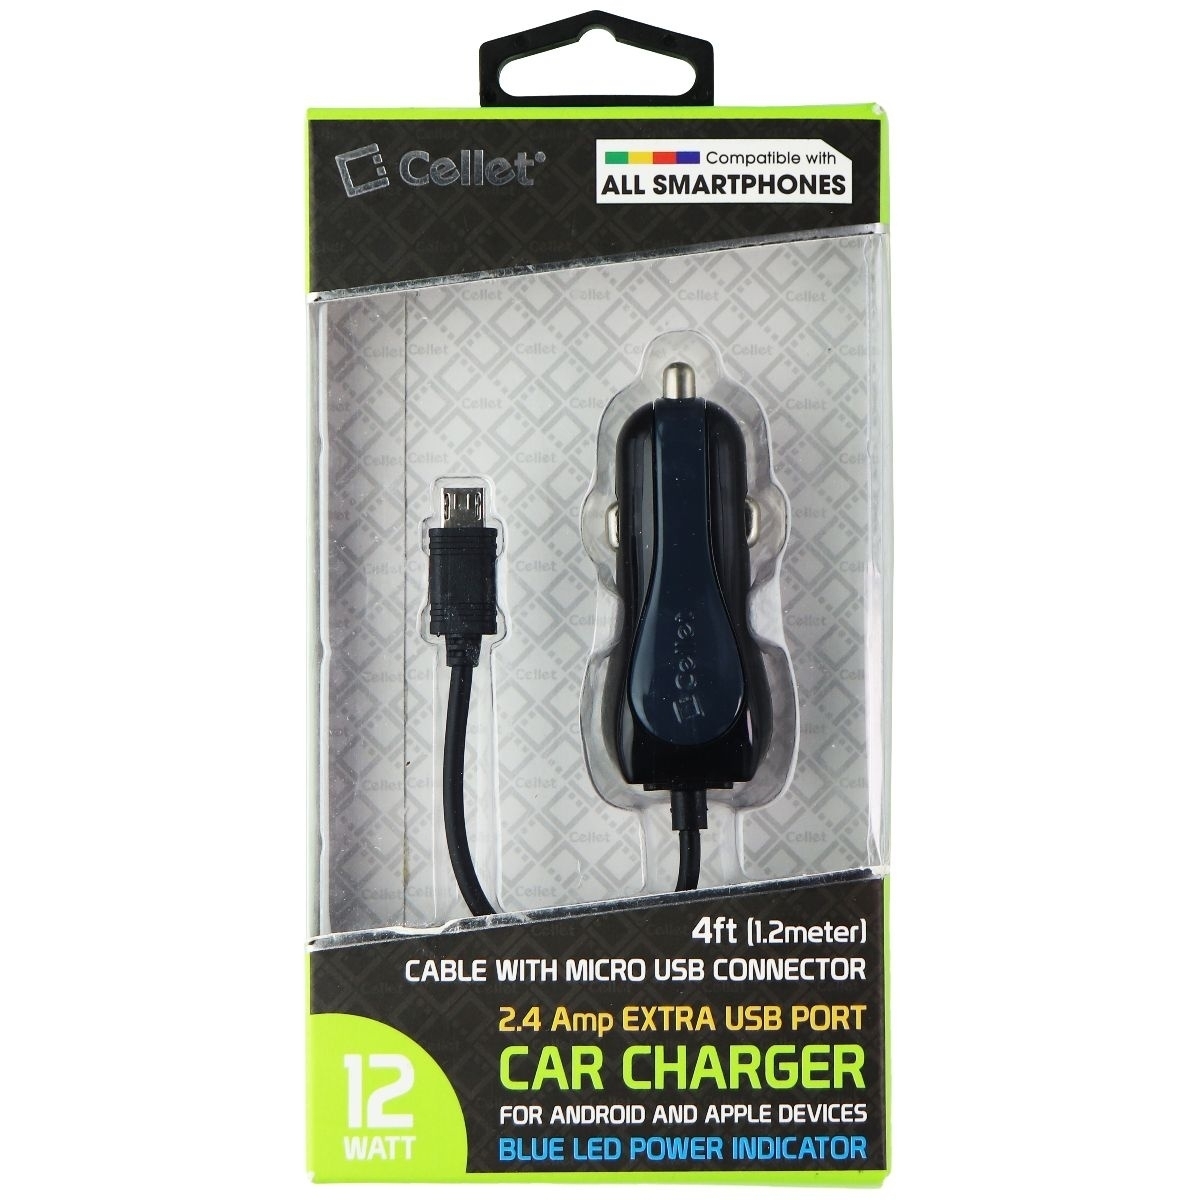 Cellet Car Charger (2.4A) With 4FT Micro USB Cable + Extra USB Port - Black